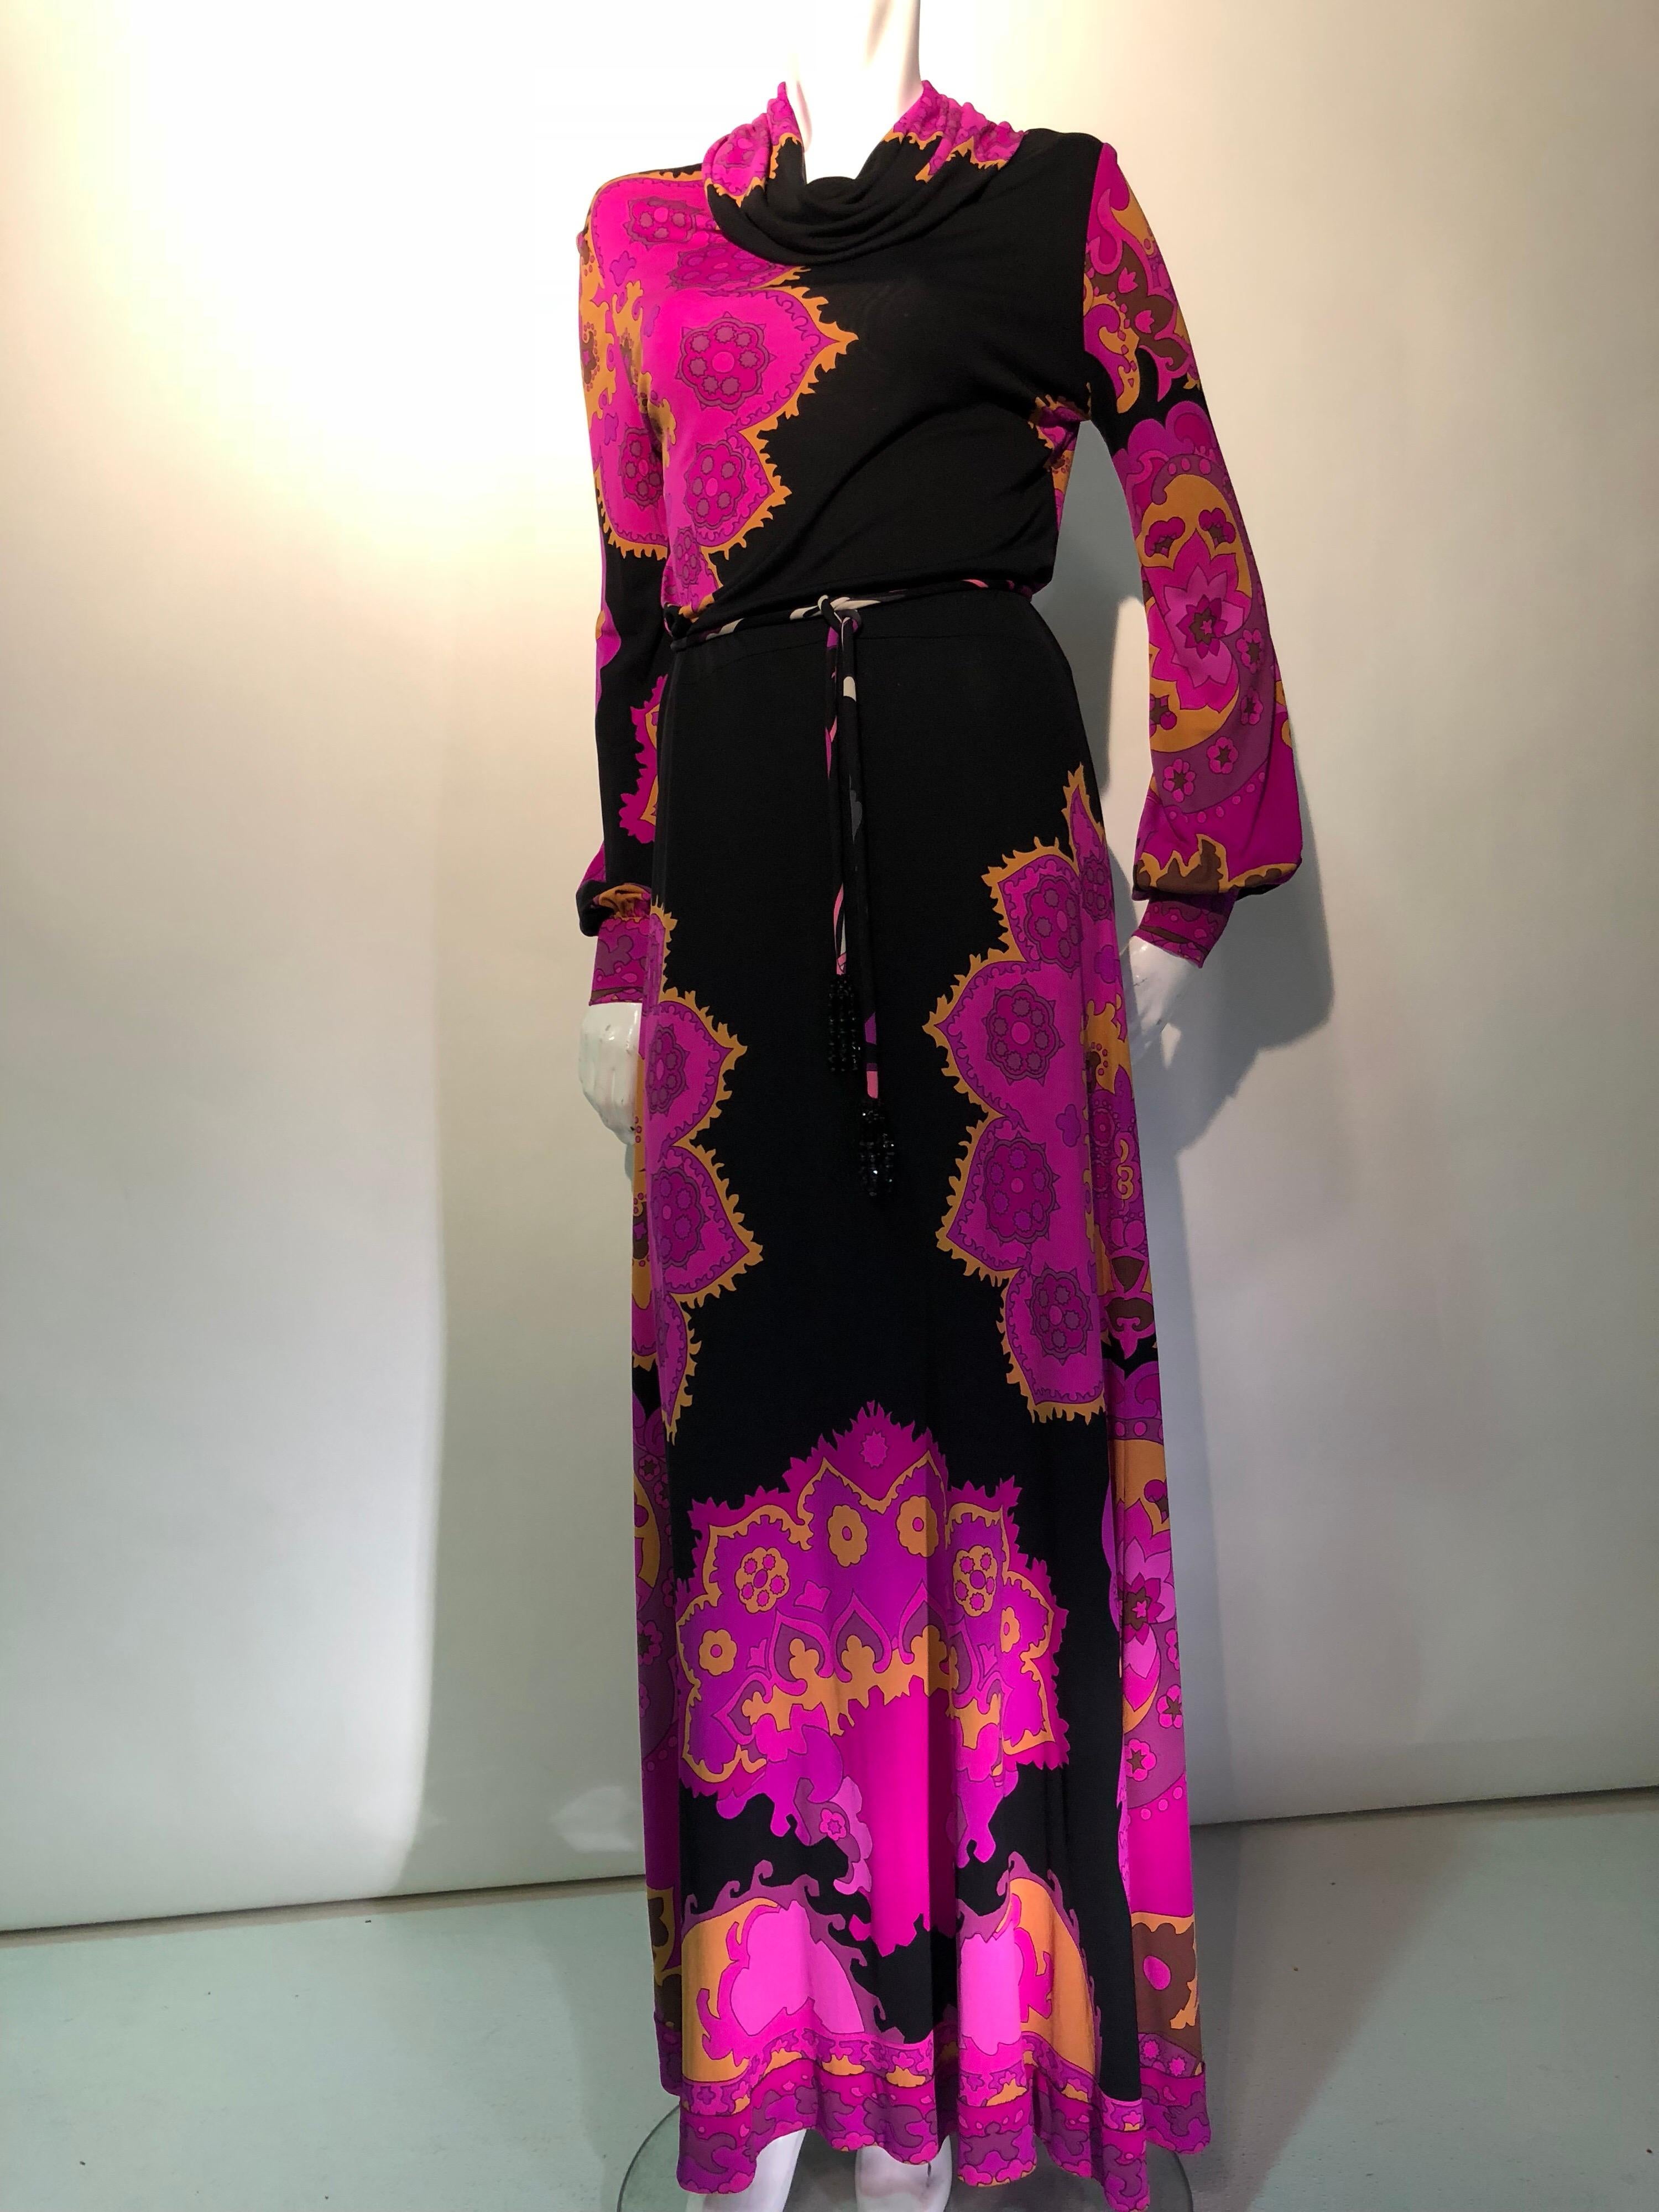 1970s Leonard Paris psychedelic-print silk jersey maxi dress with cowl neckline and balloon sleeves. Fuchsia, orange and black colorway. Leonard was known for their supremely light weight silk jerseys. An exciting example of their forté.